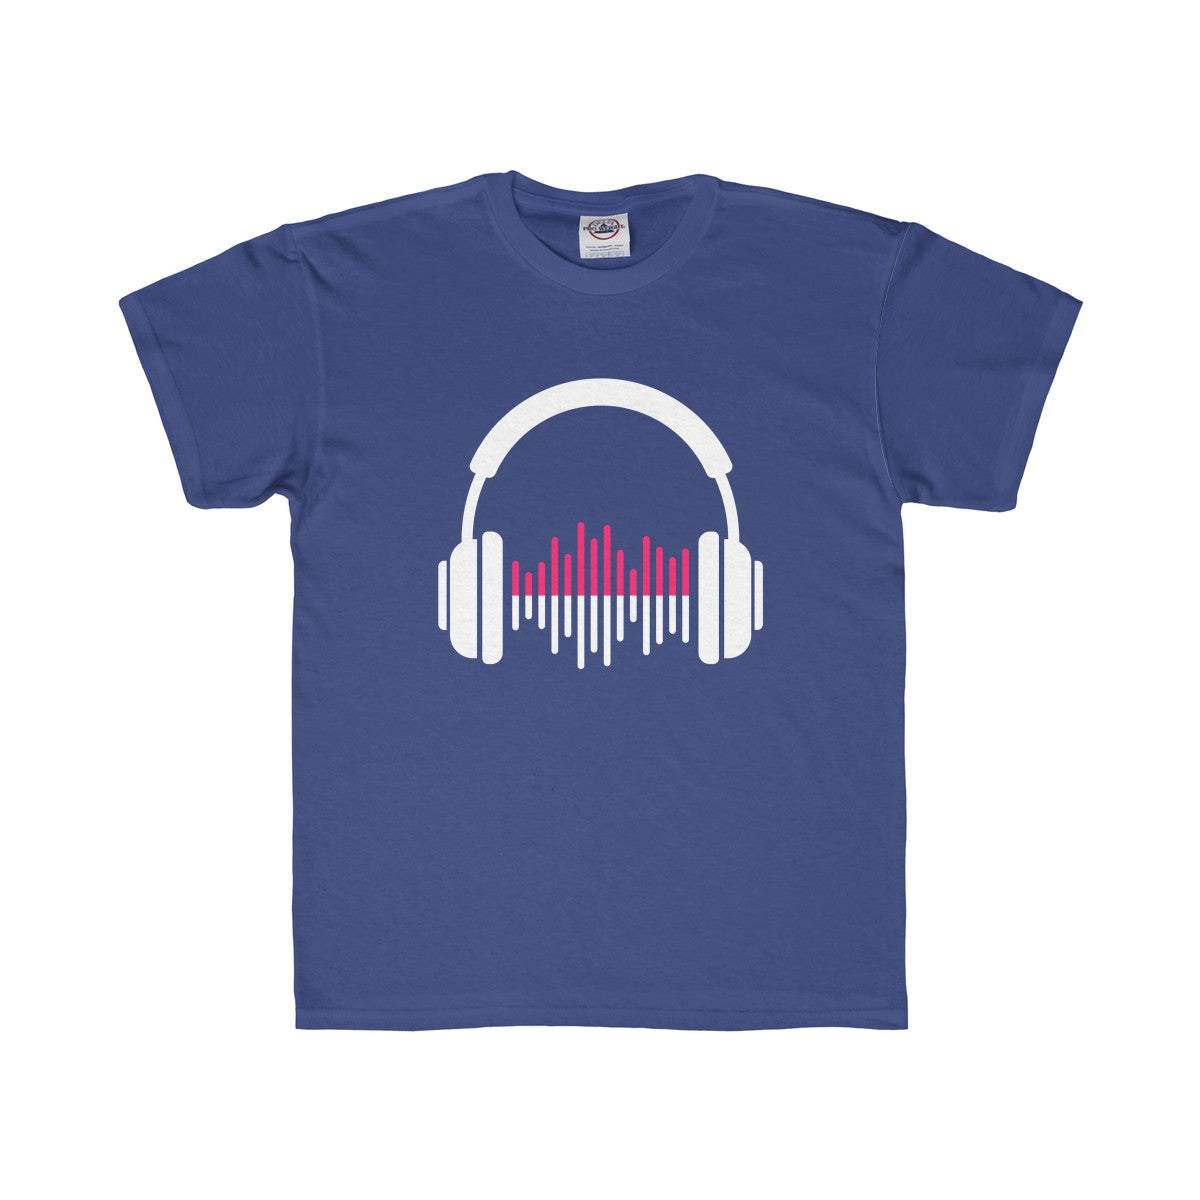 Music Lover Youth Regular Fit Tee-Kids clothes-PureDesignTees